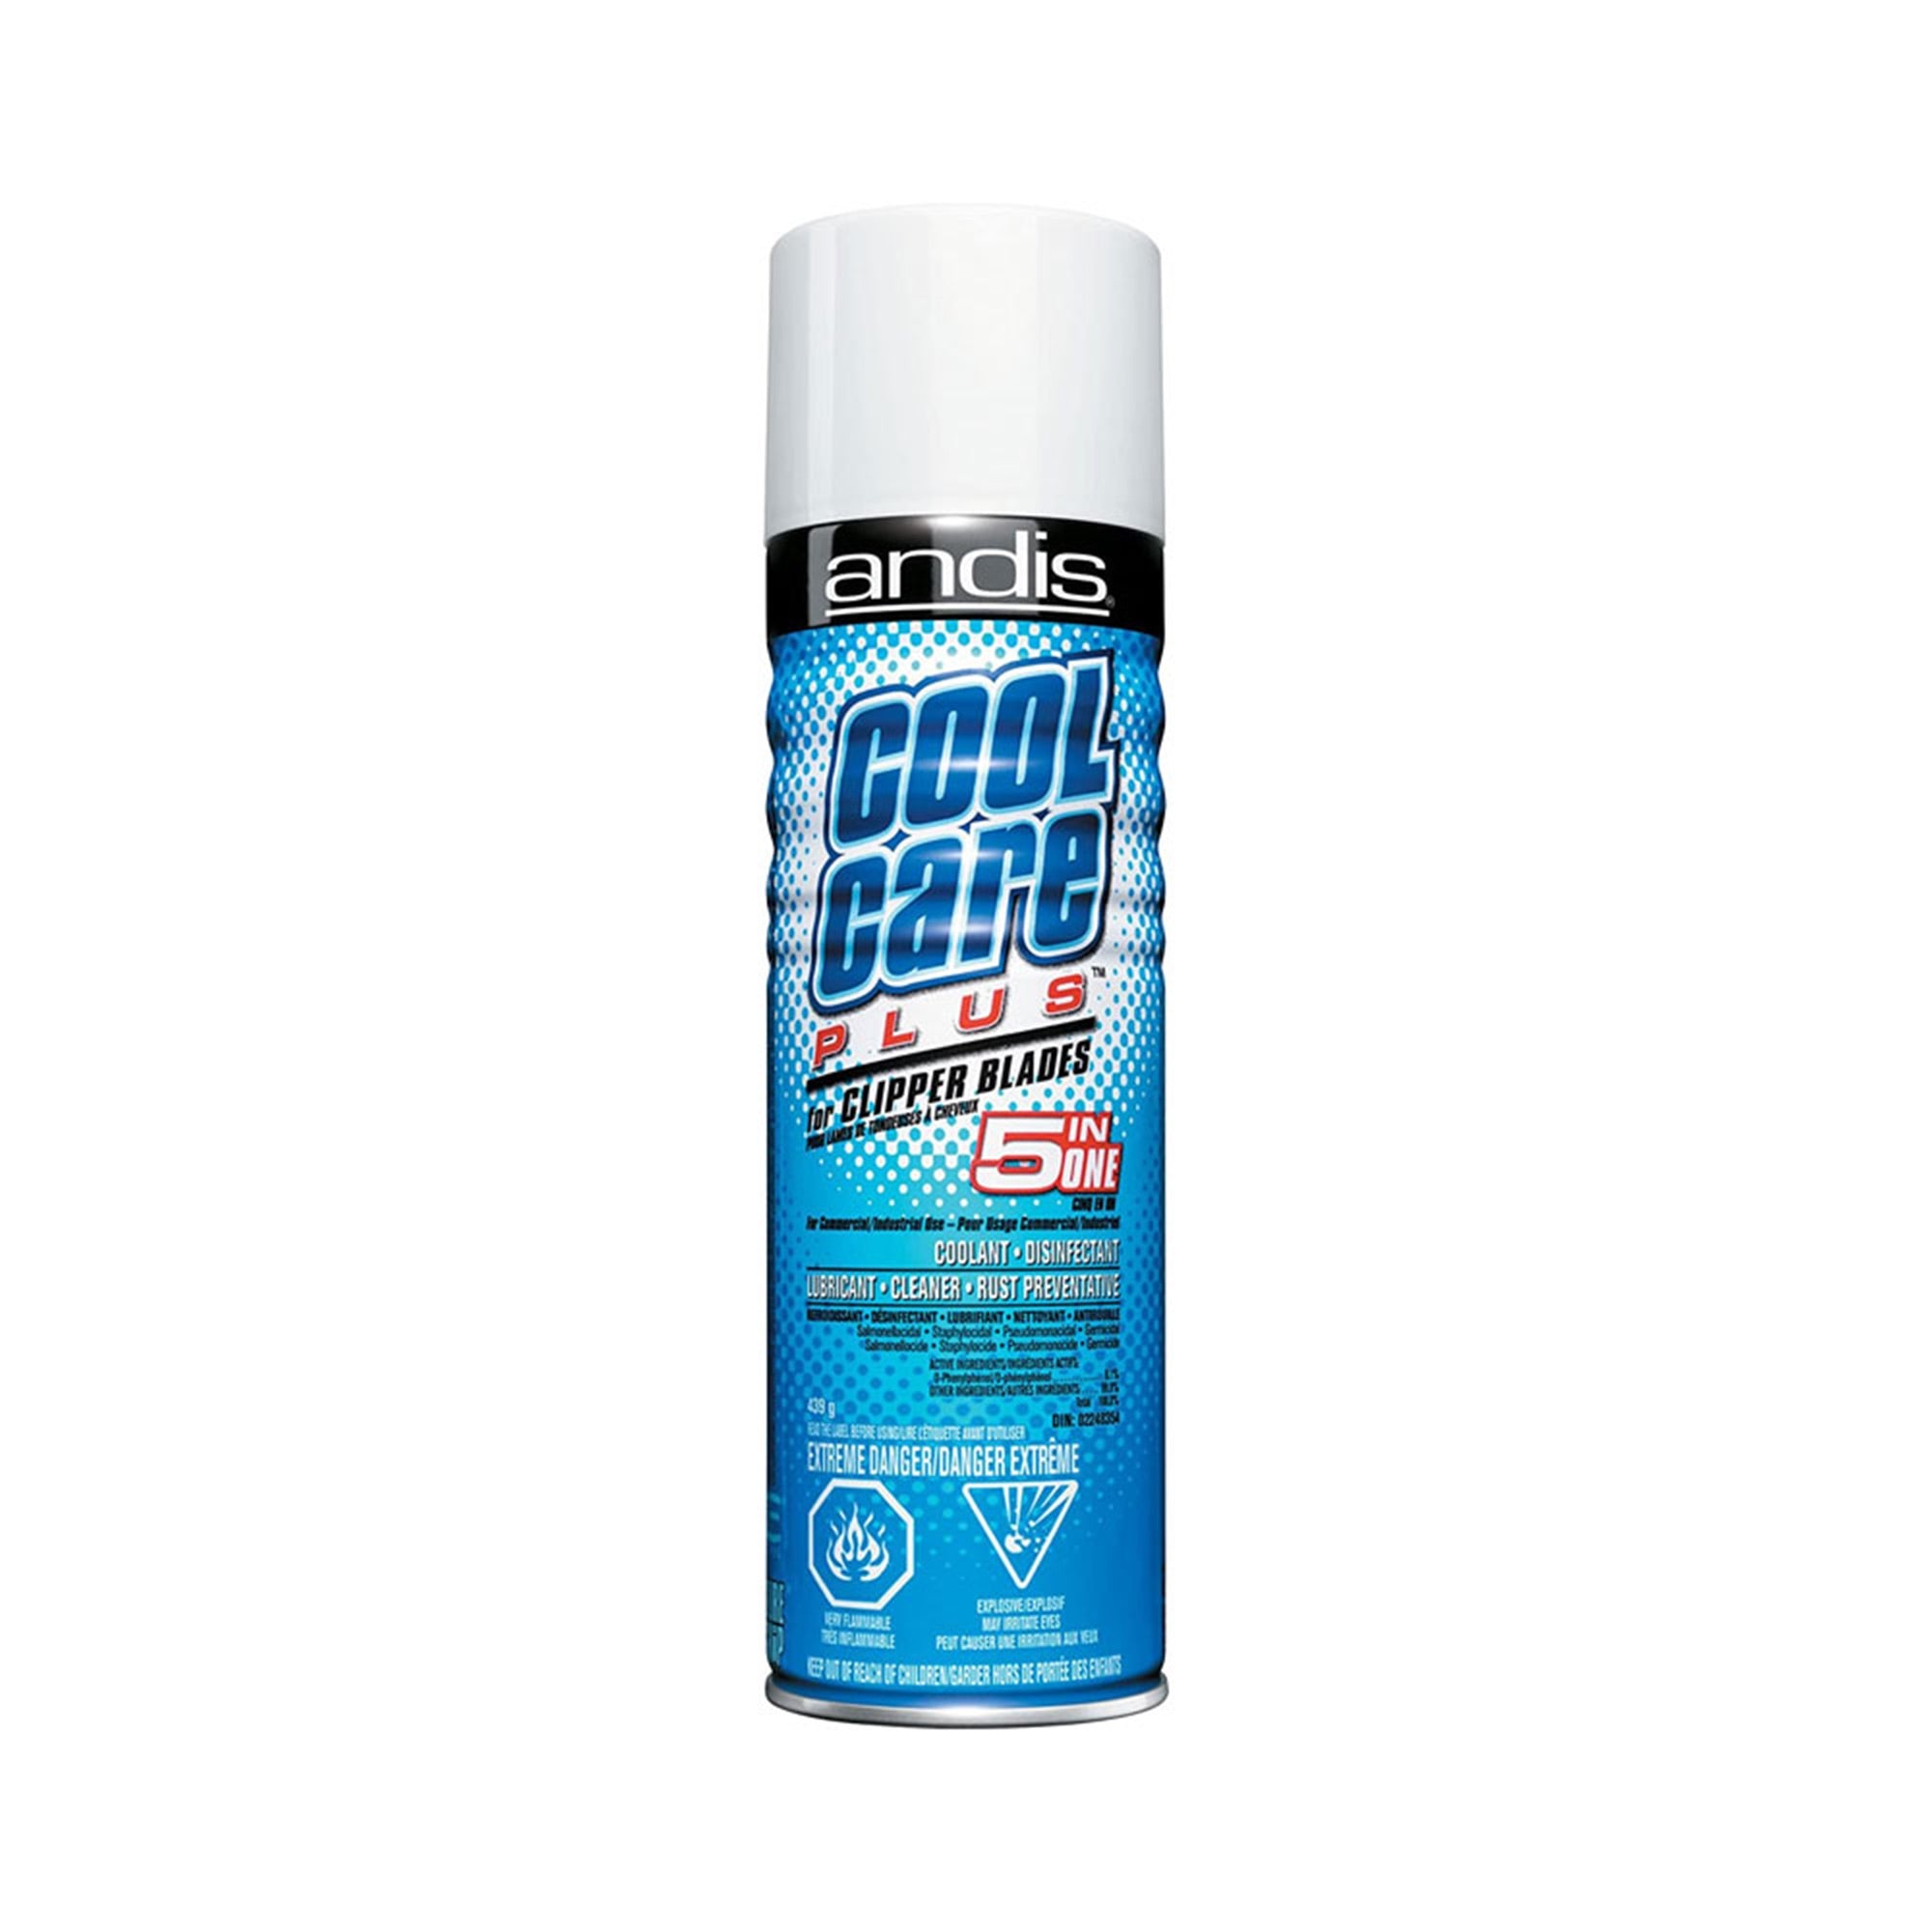 Andis - Cool Care Plus 5 in 1 Cleaner Spray 439g